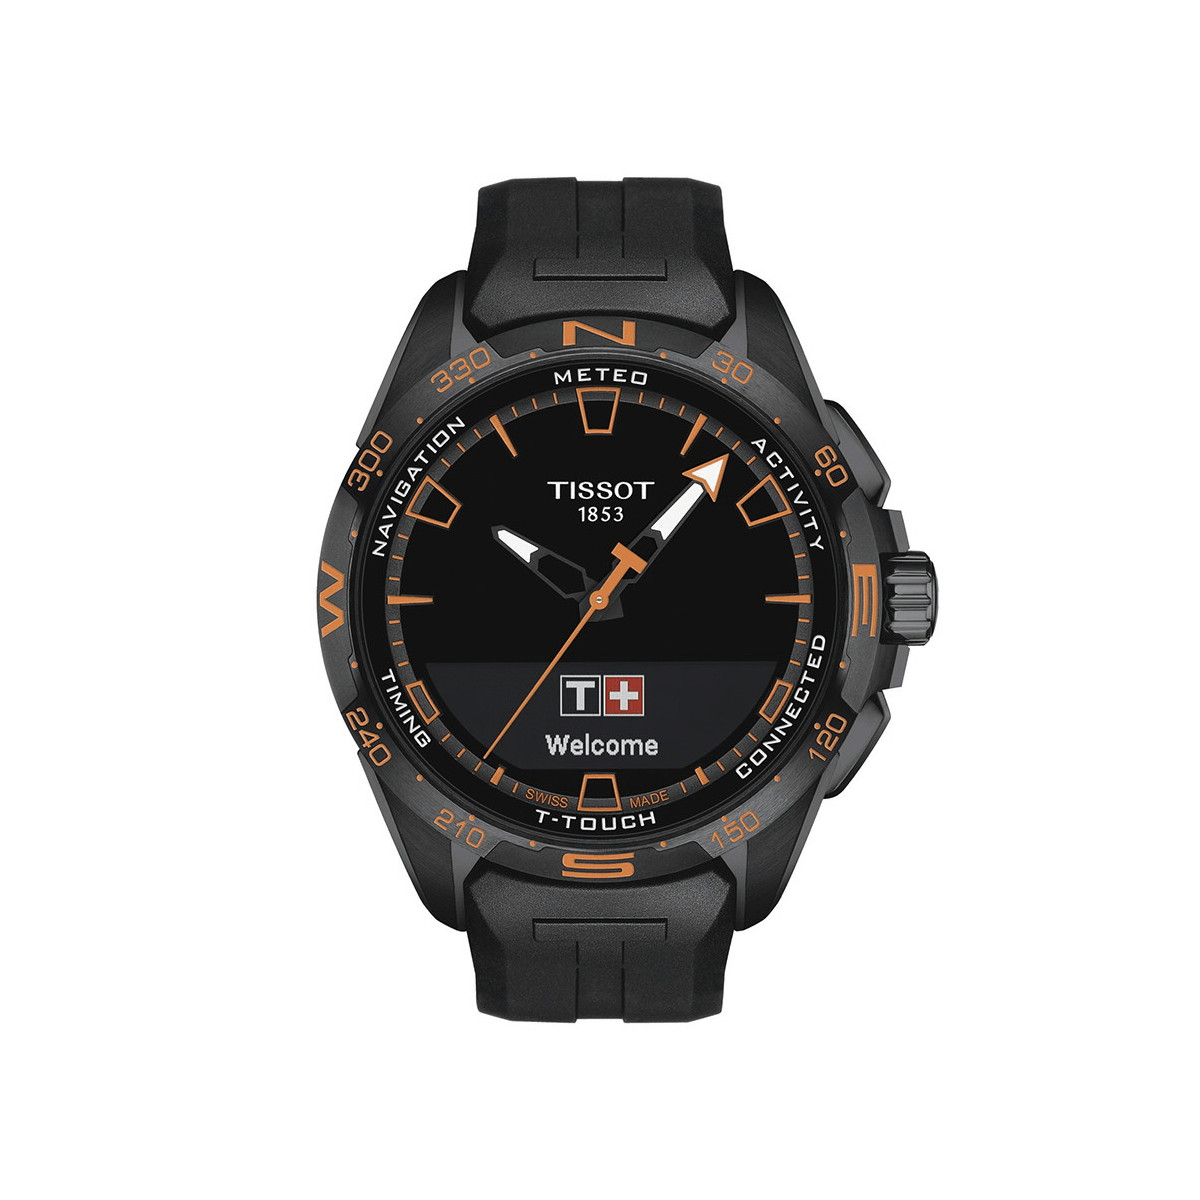 TISSOT T-TOUCH CONNECT SOLAR BLACK AND ORANGE